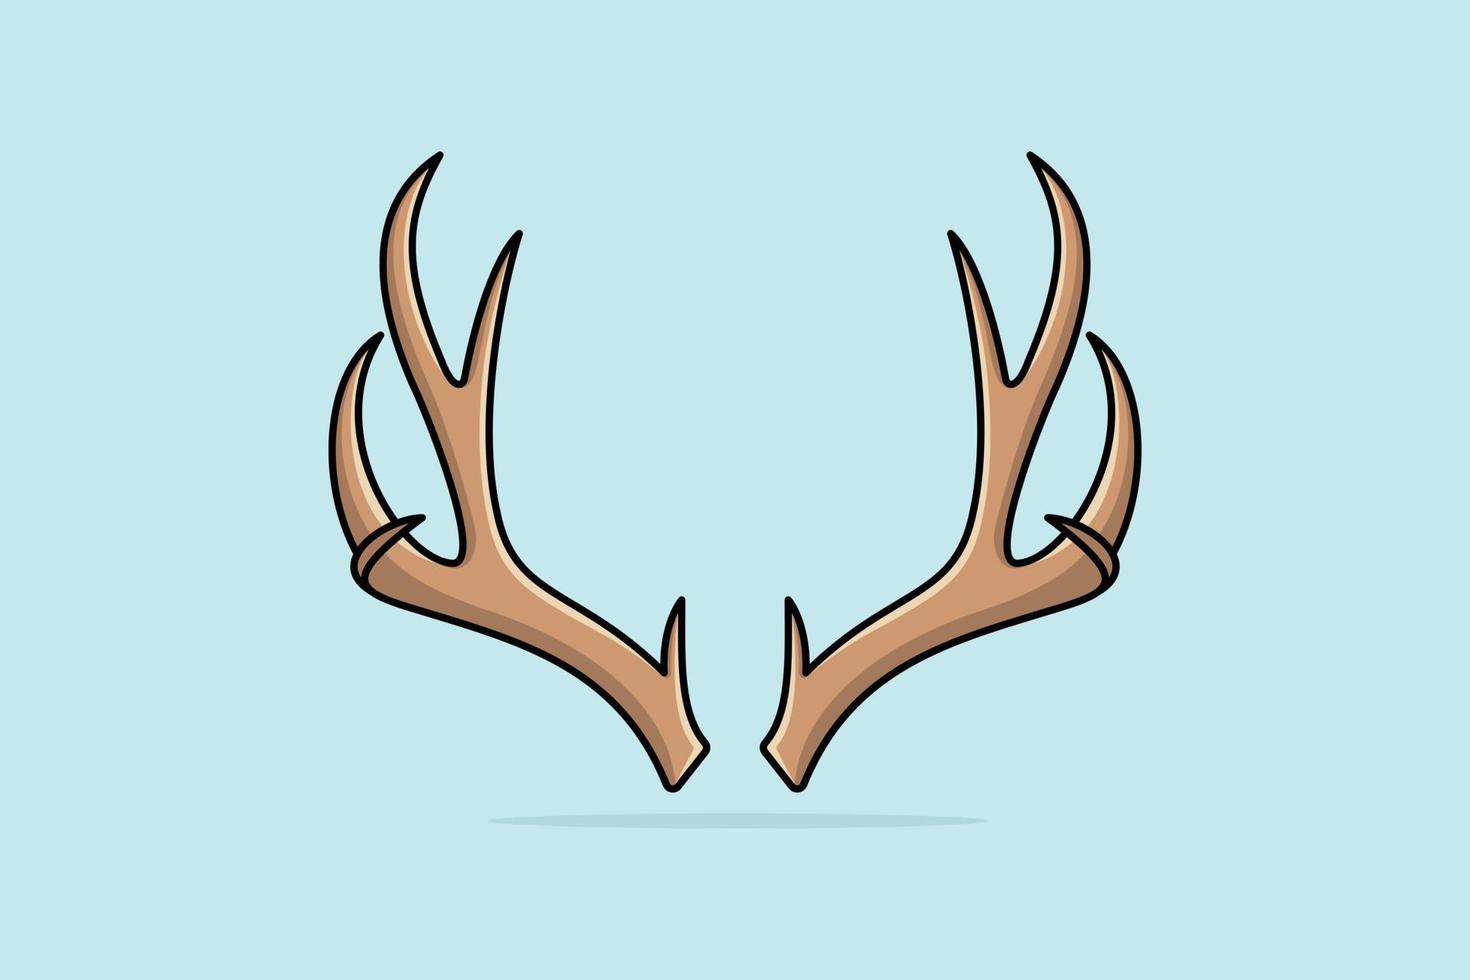 Deer Antler Horn vector icon illustration. Animal objects icon design concept. Animal nature, Wildlife animals, Head antler, hunted deer, Antler icon, Sign and symbol, Deer beauty.